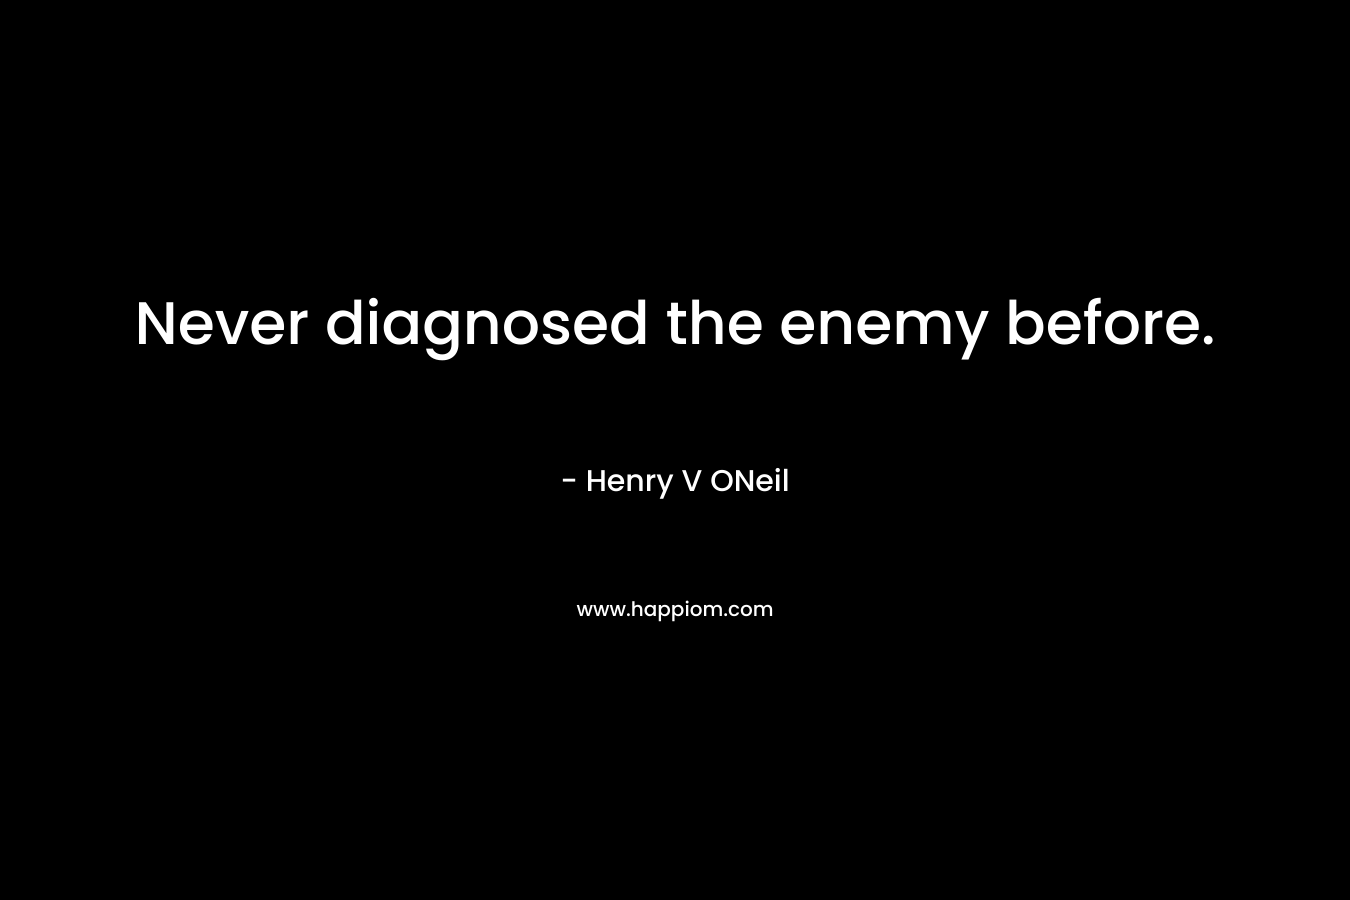 Never diagnosed the enemy before.